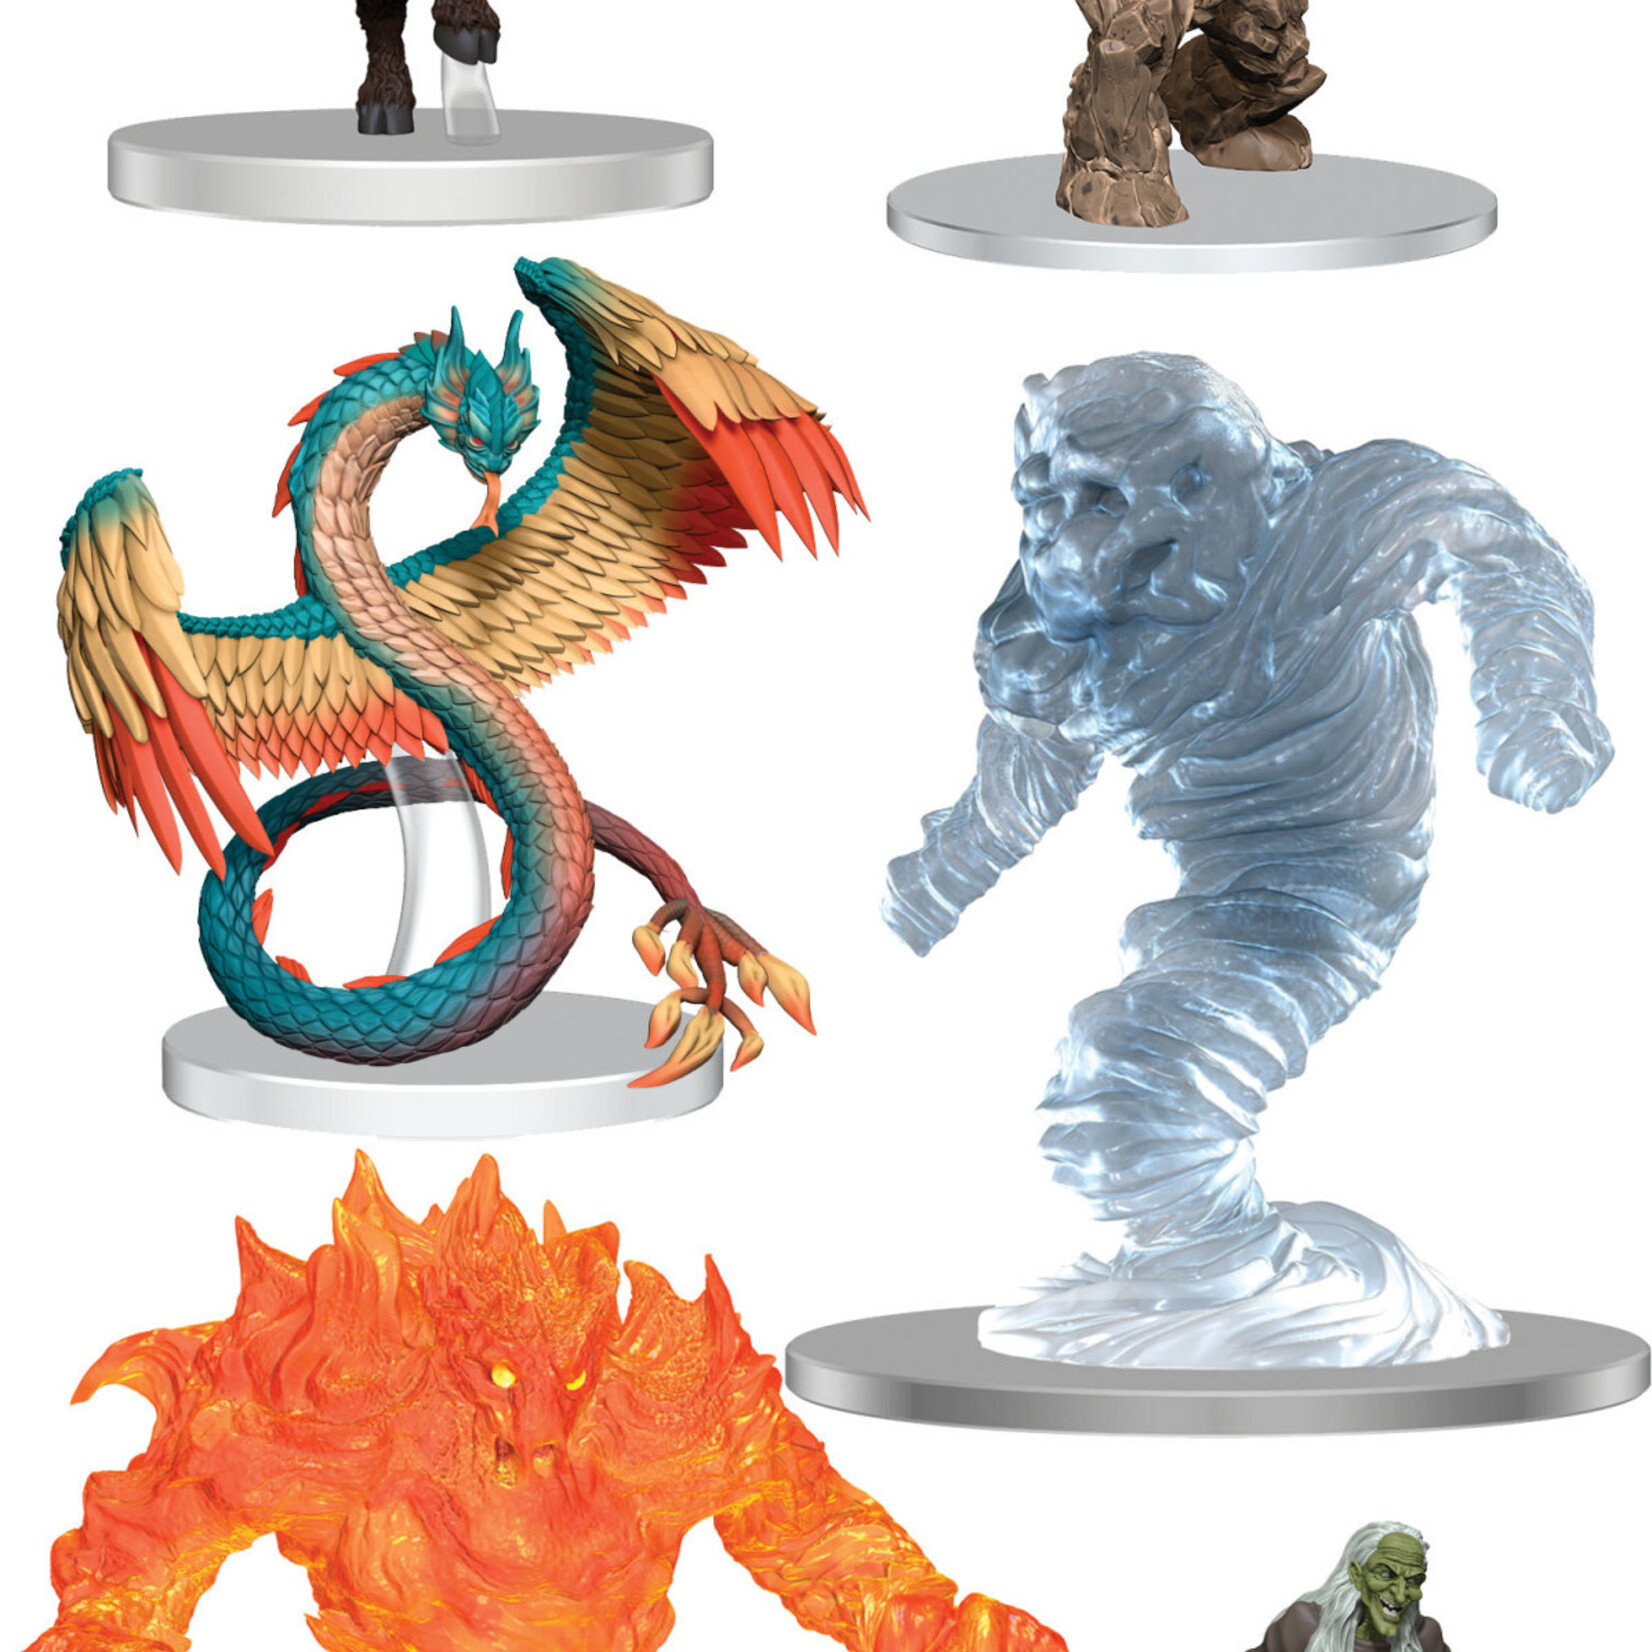 WizKids Dungeons & Dragons Fantasy Miniatures: Icons of the Realms Summoned Creatures Set 2